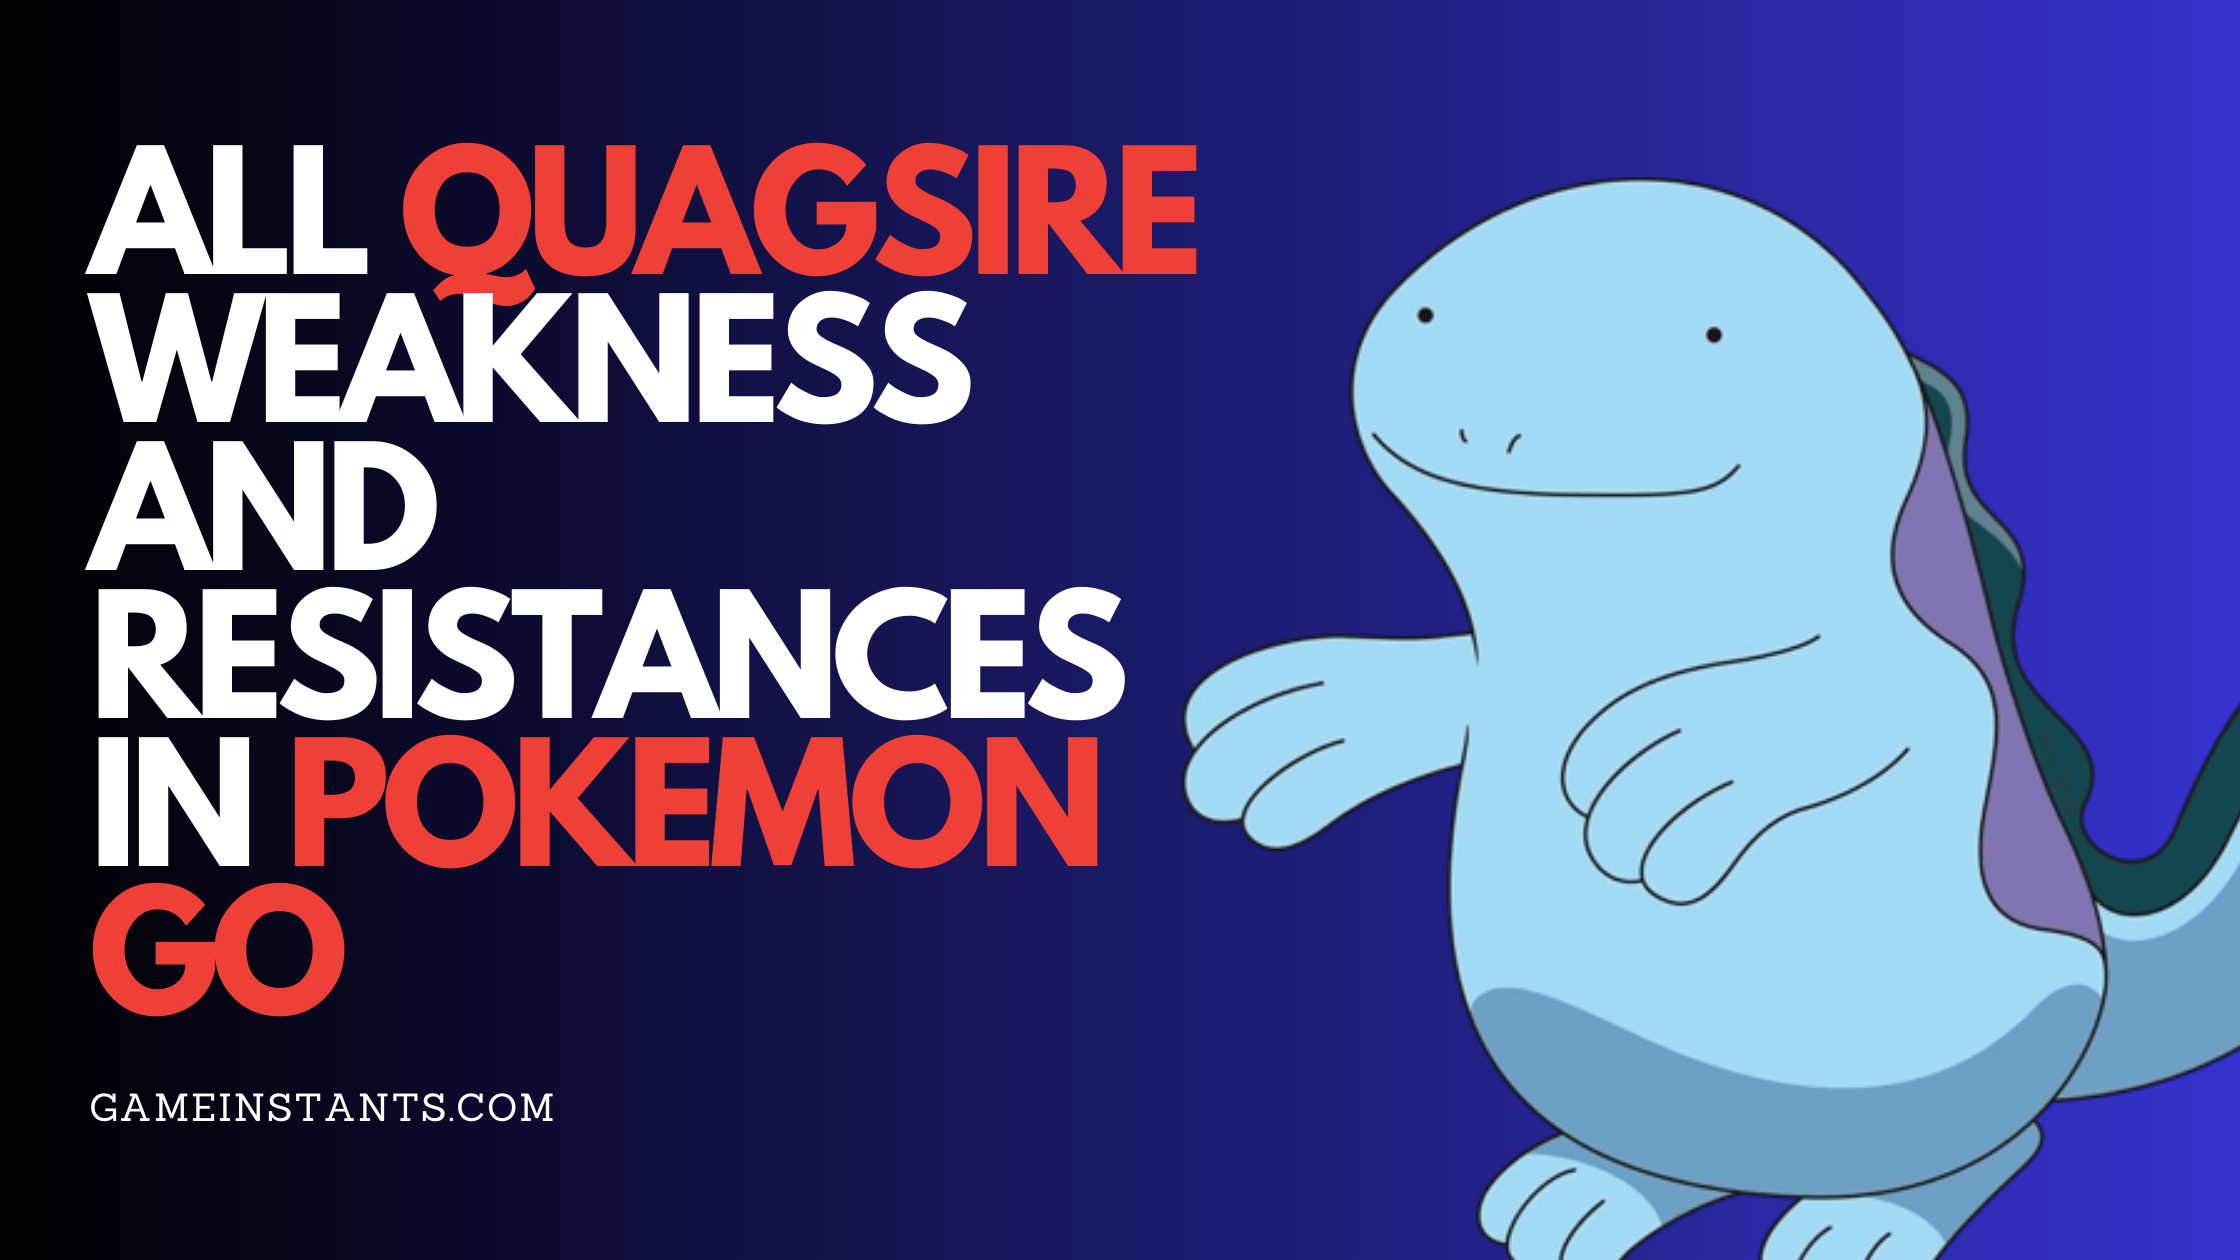 Quagsire Weakness and Resistances